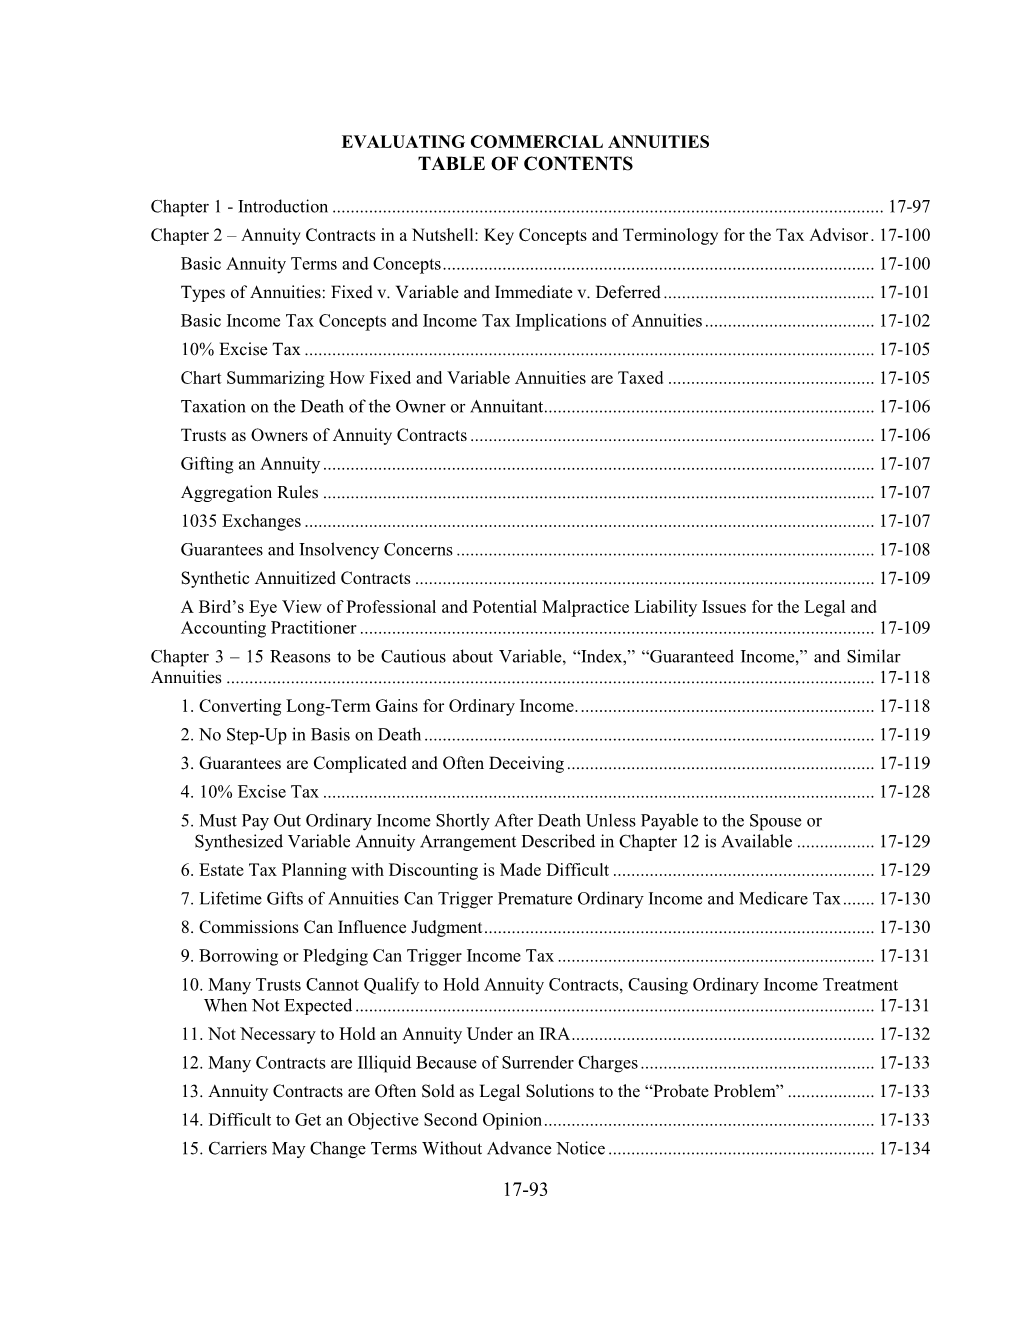 17-93 Table of Contents